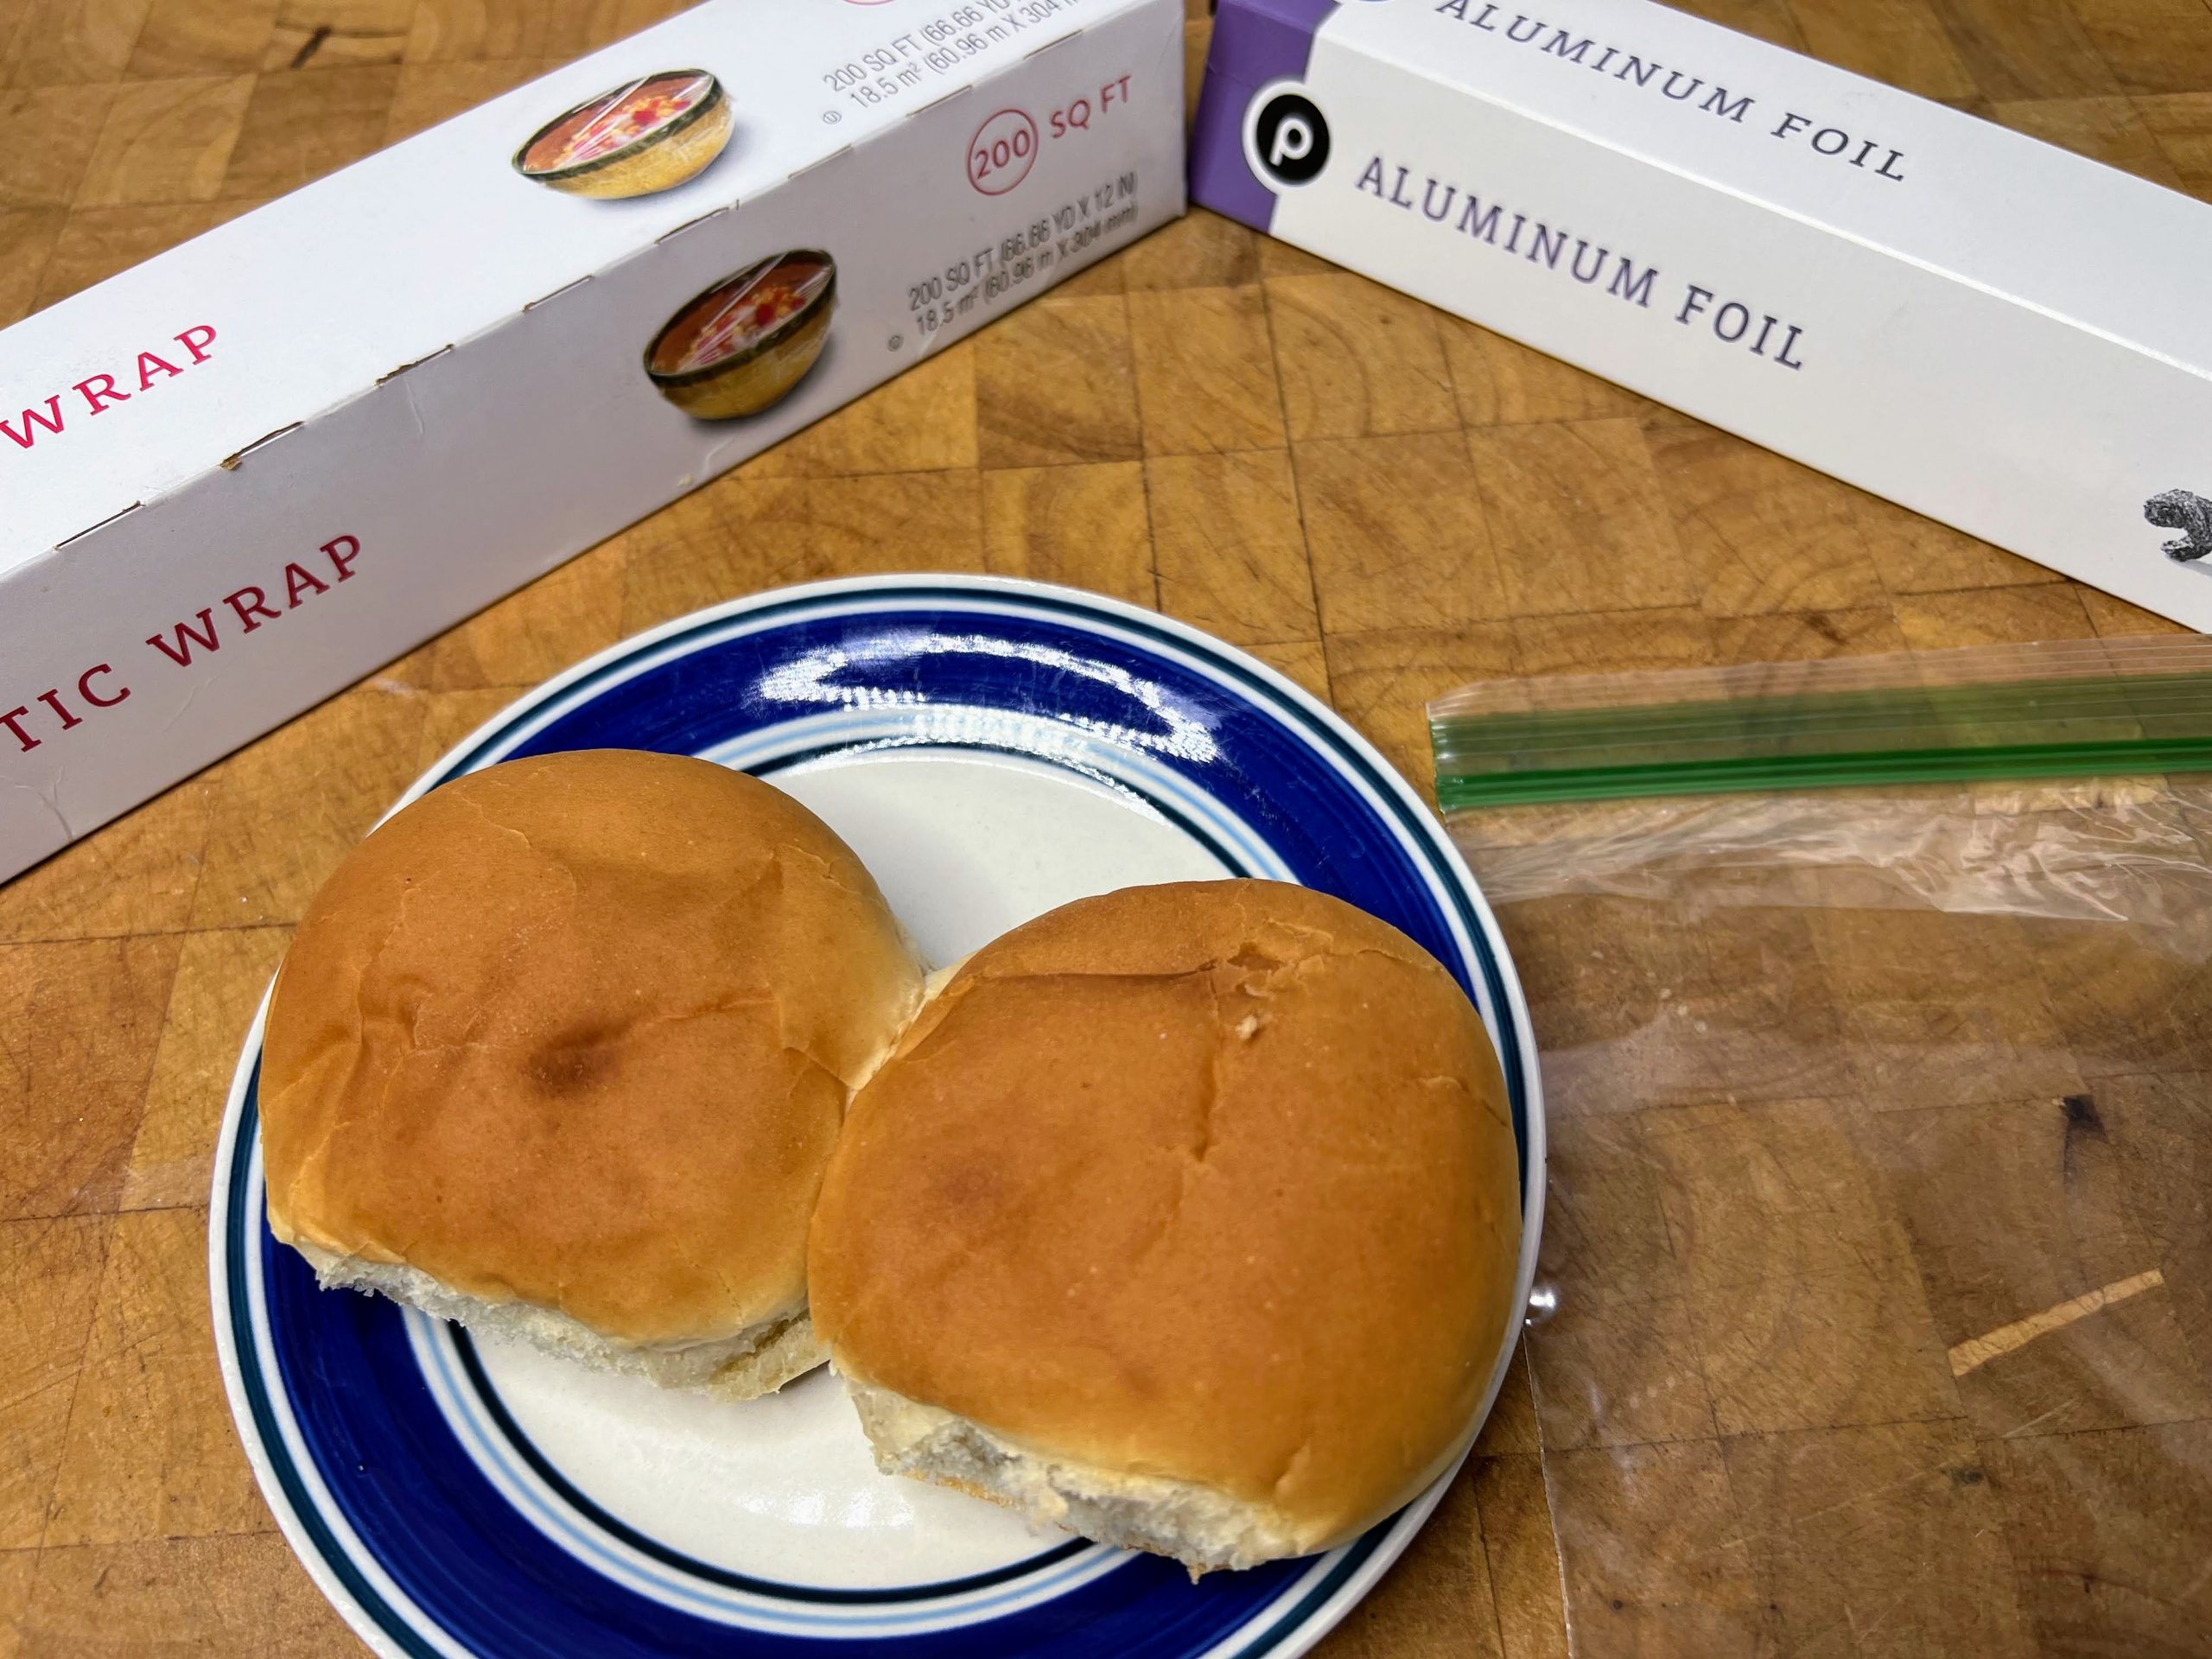 two hamburger buns on a plate next to an empty freezer bag, plastic wrap and aluminum foil